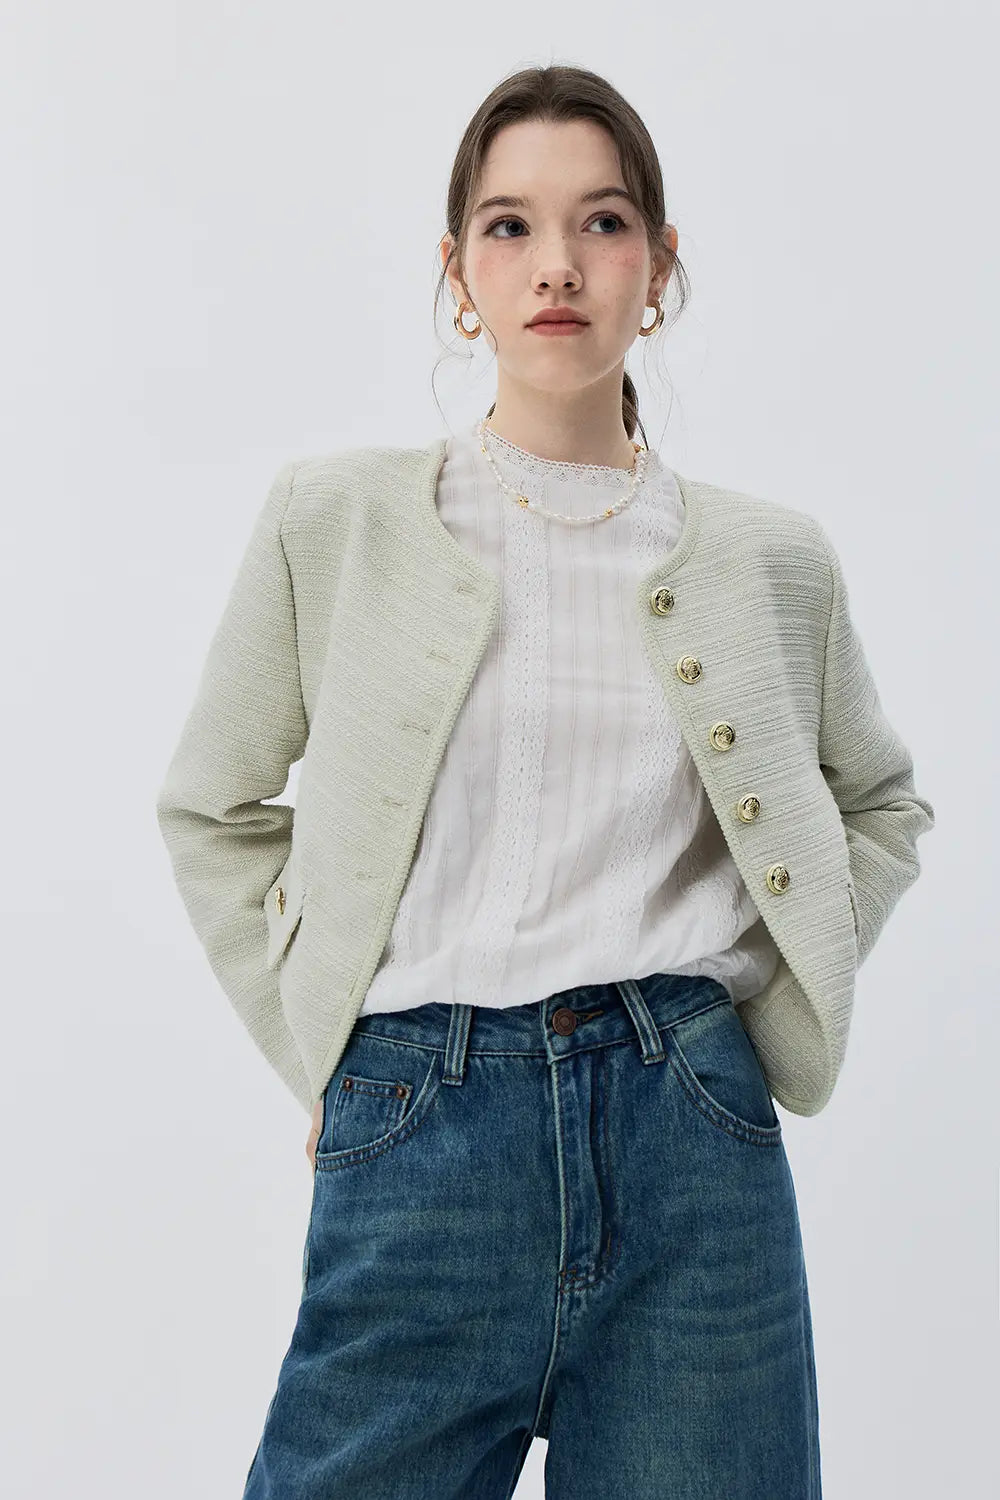 Textured Jacket with Gold Buttons Classic Women's Fashion